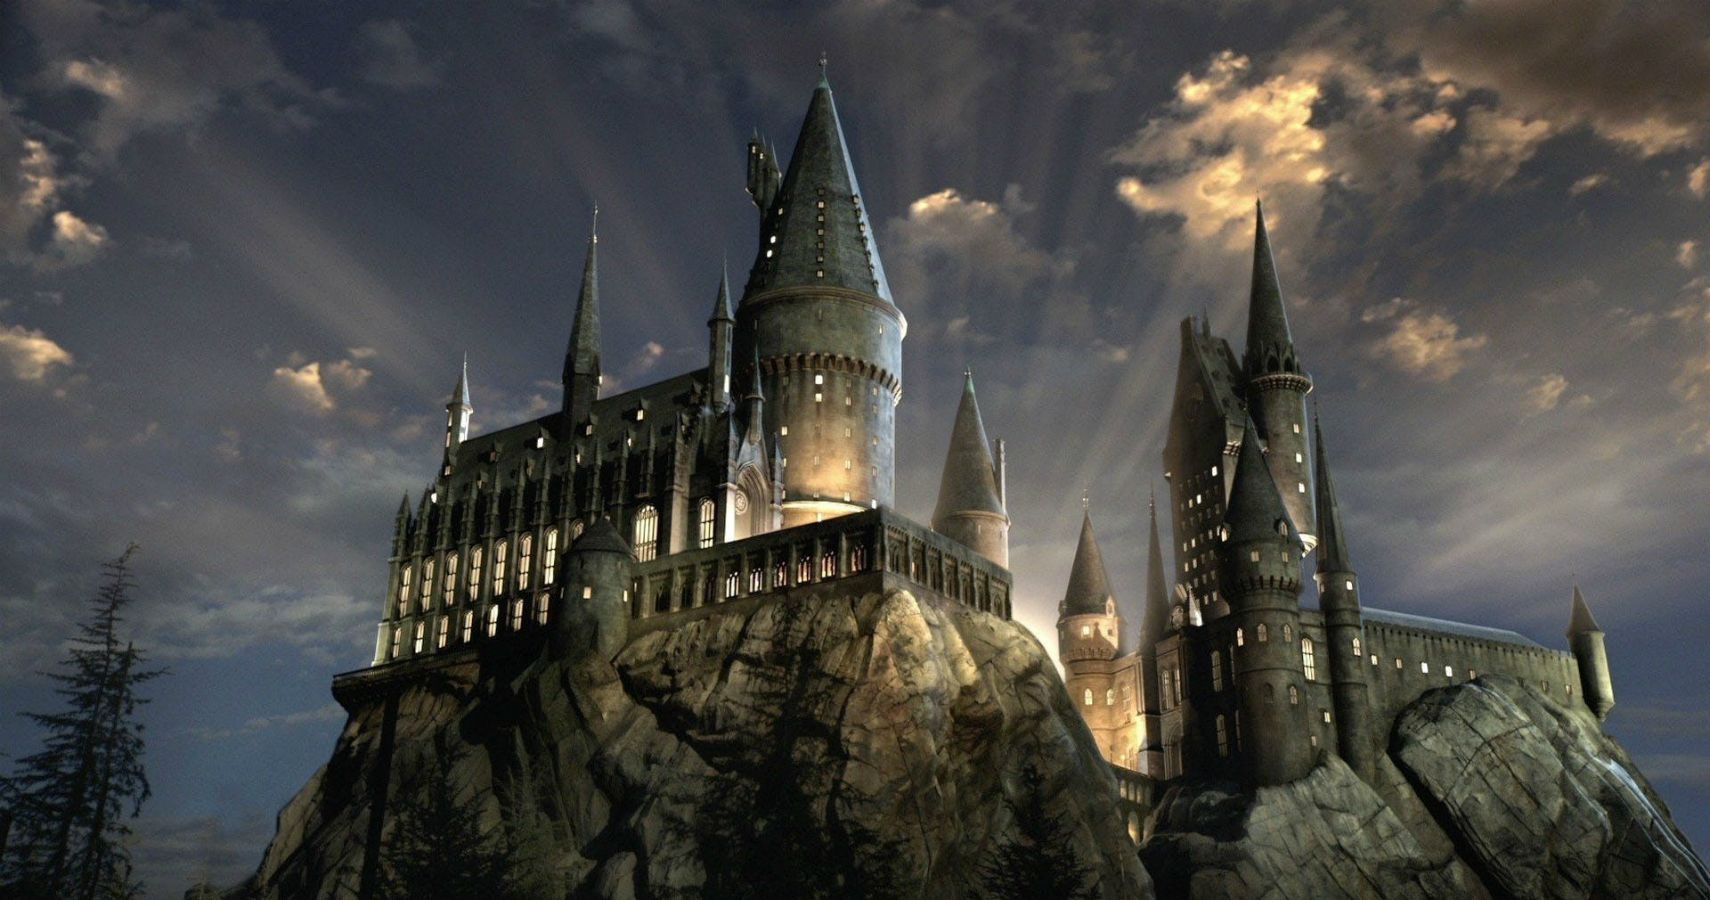 Harry Potter: 7 Settings From The Movies That Were Just Like The Books